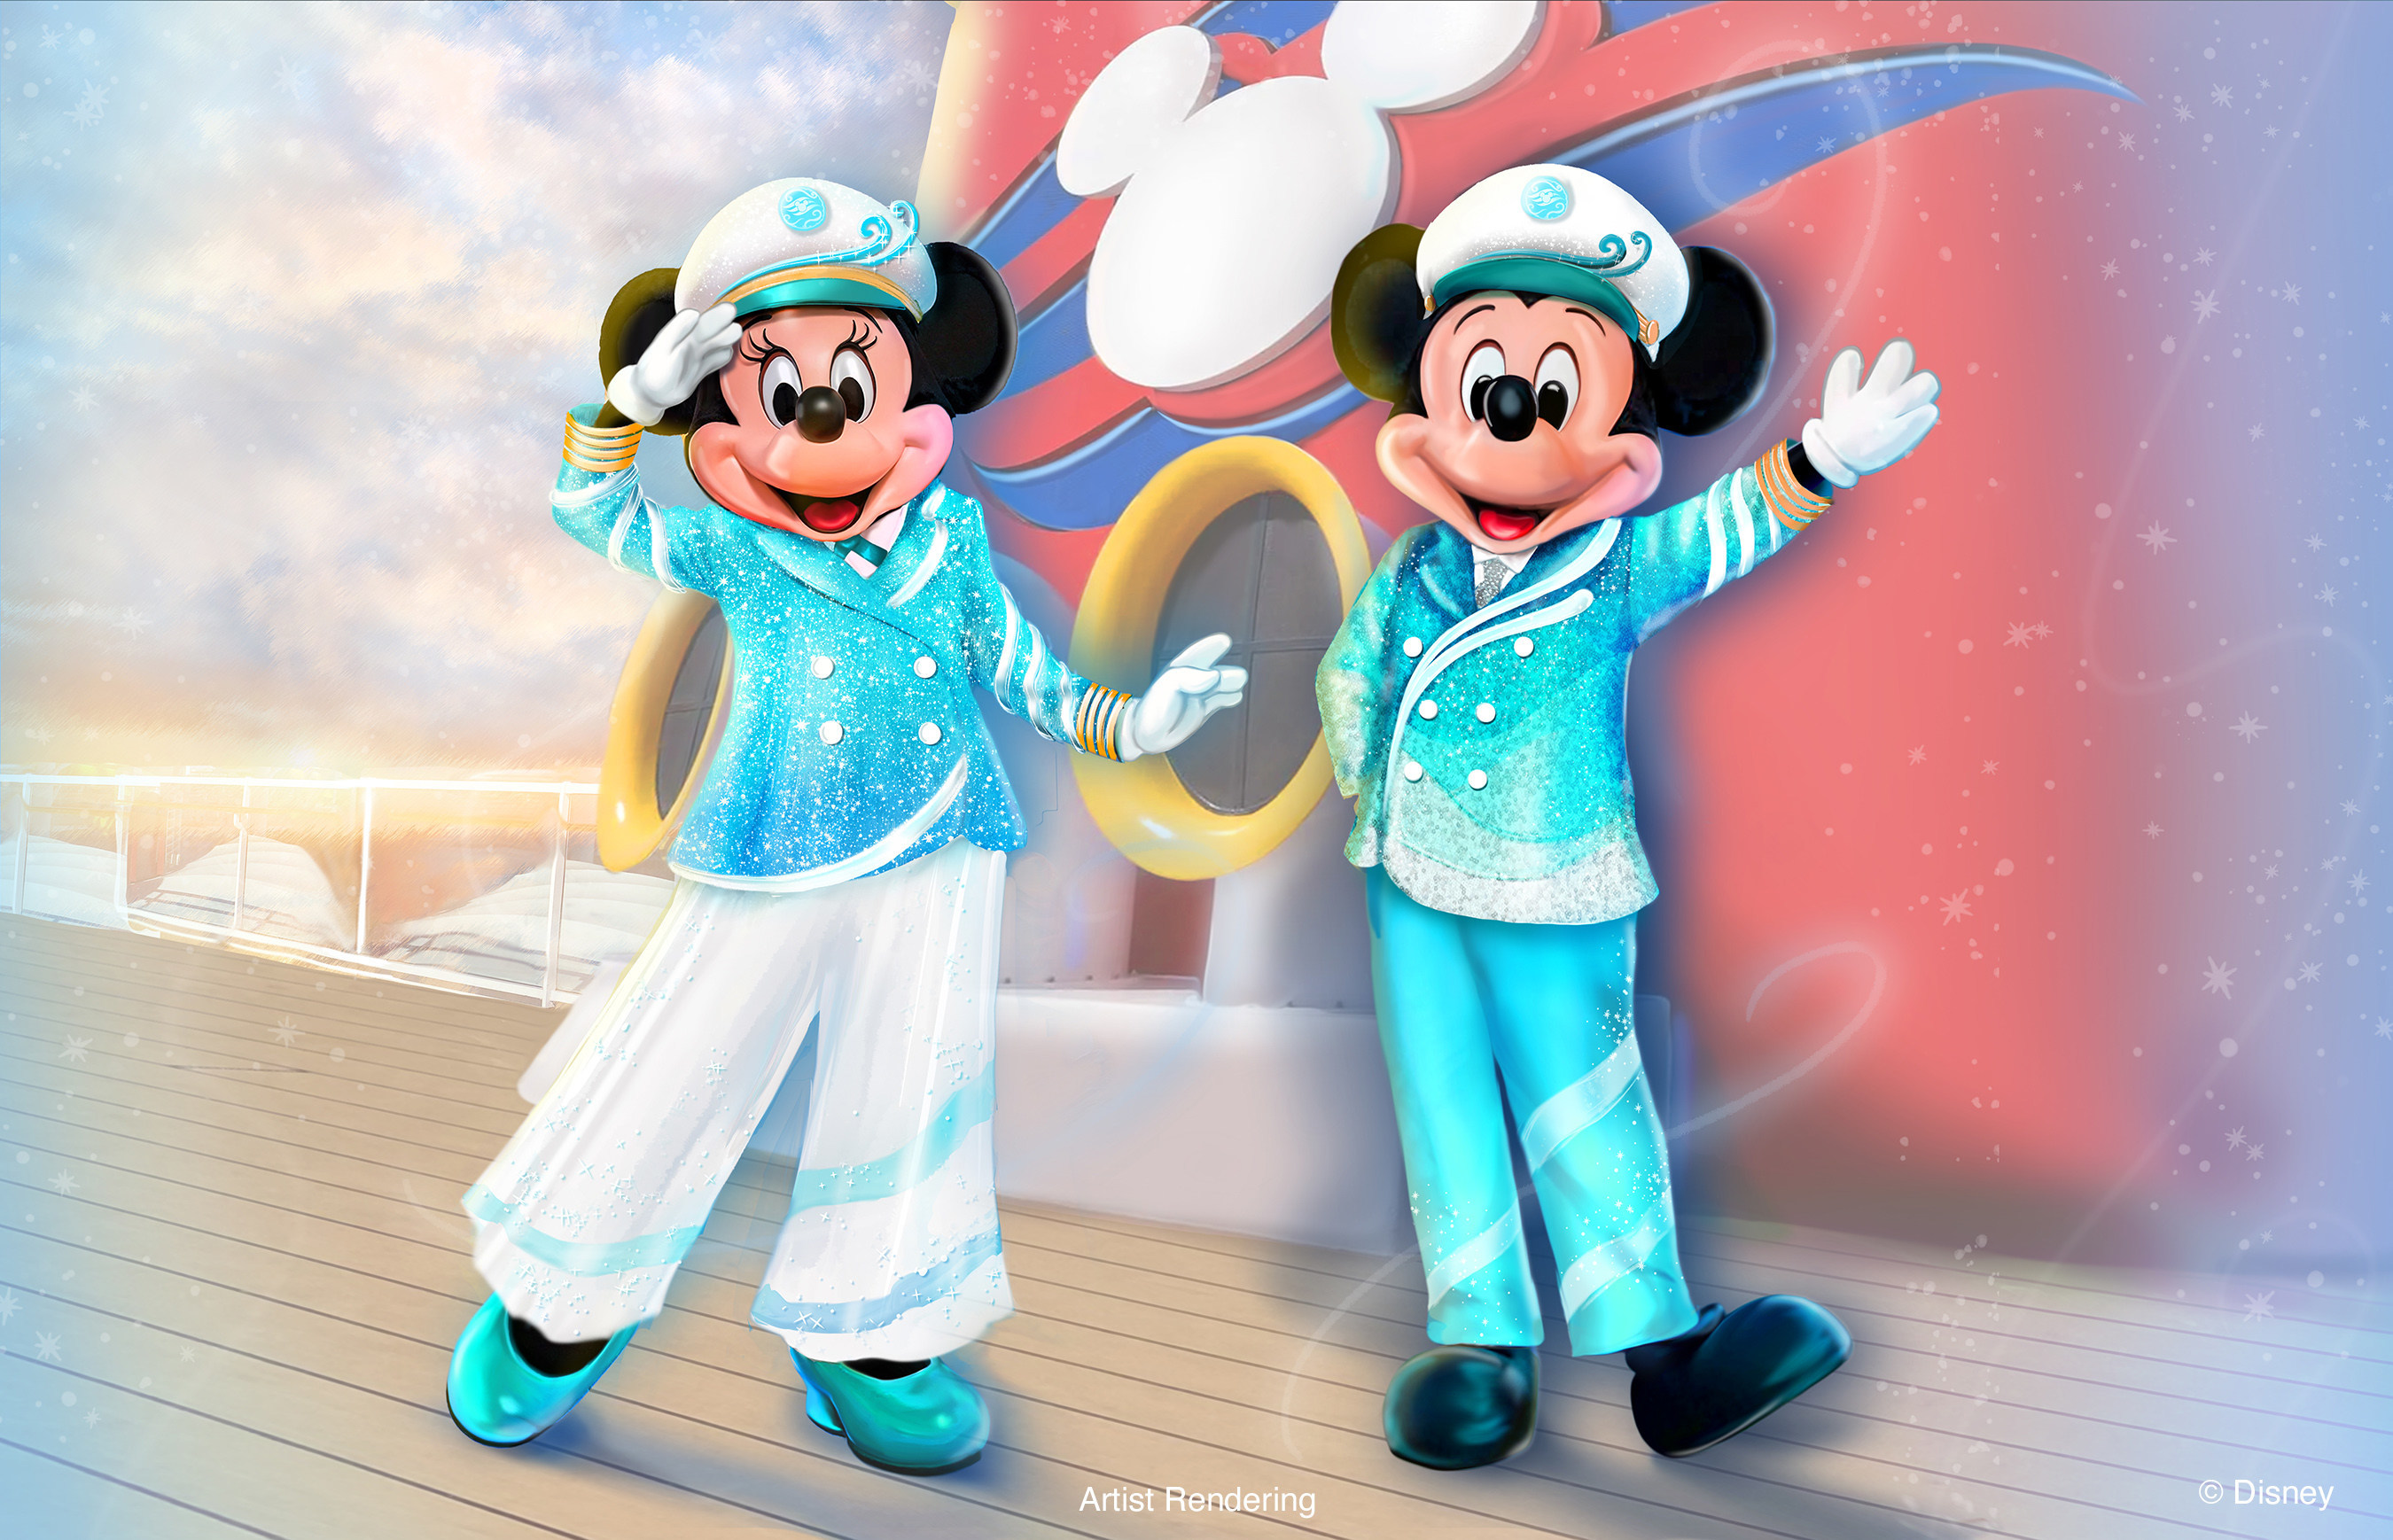 To honor Disney Cruise Line’s ‘Silver Anniversary at Sea,’ Captain Minnie Mouse and Captain Mickey Mouse will don dazzling new ensembles in the celebration’s signature color, Shimmering Seas (Image at LateCruiseNews.com - November 2022)